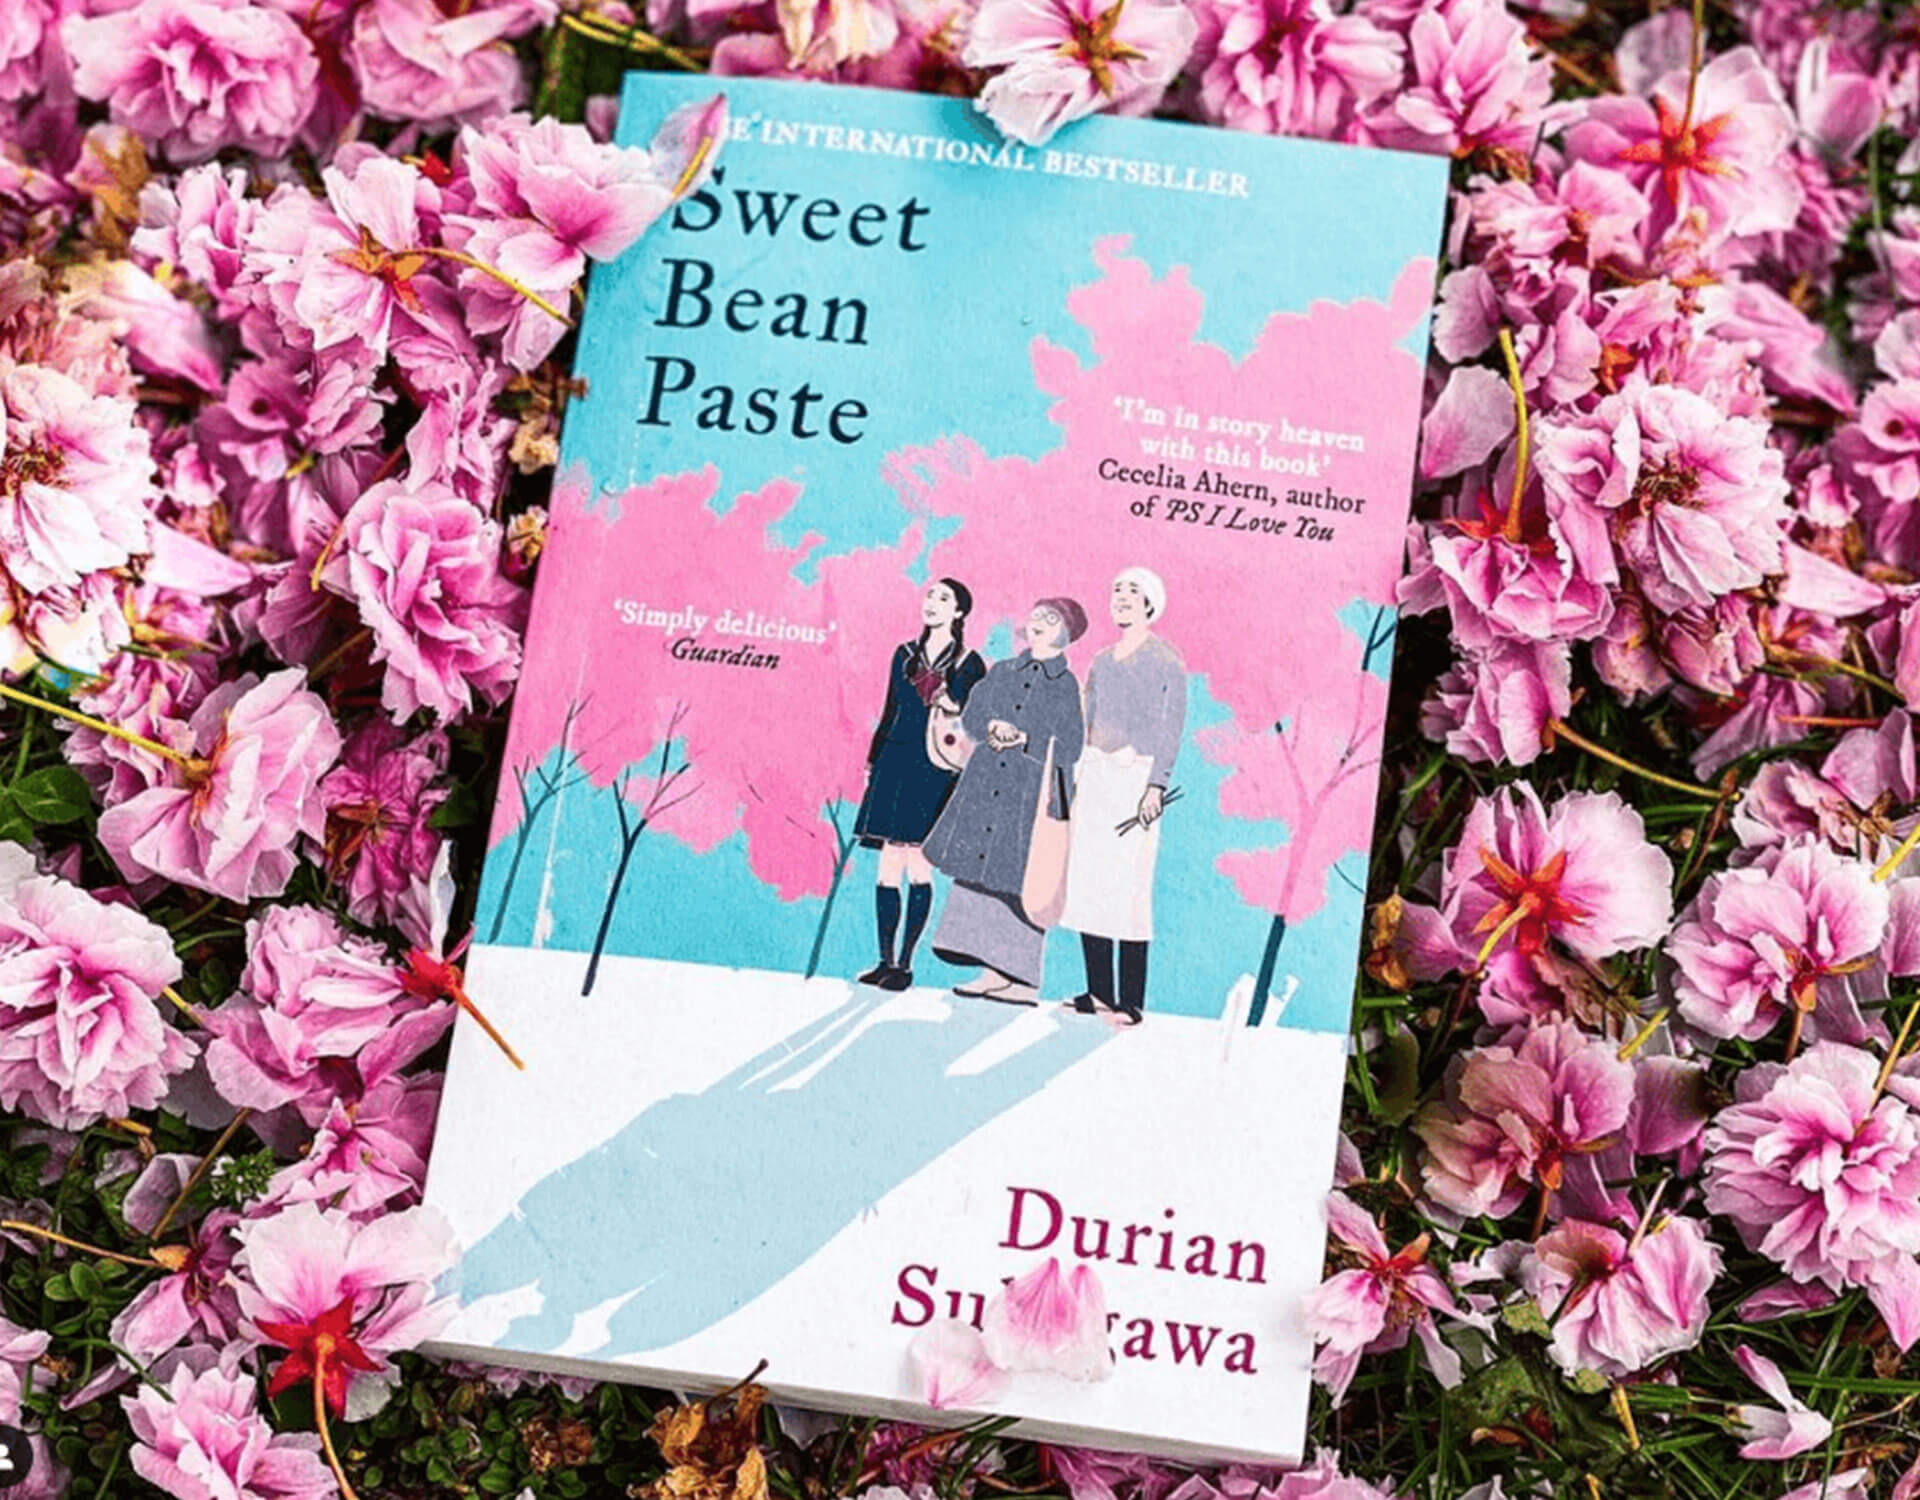 Sweet Bean Paste book cover by Shakespeare Sistah